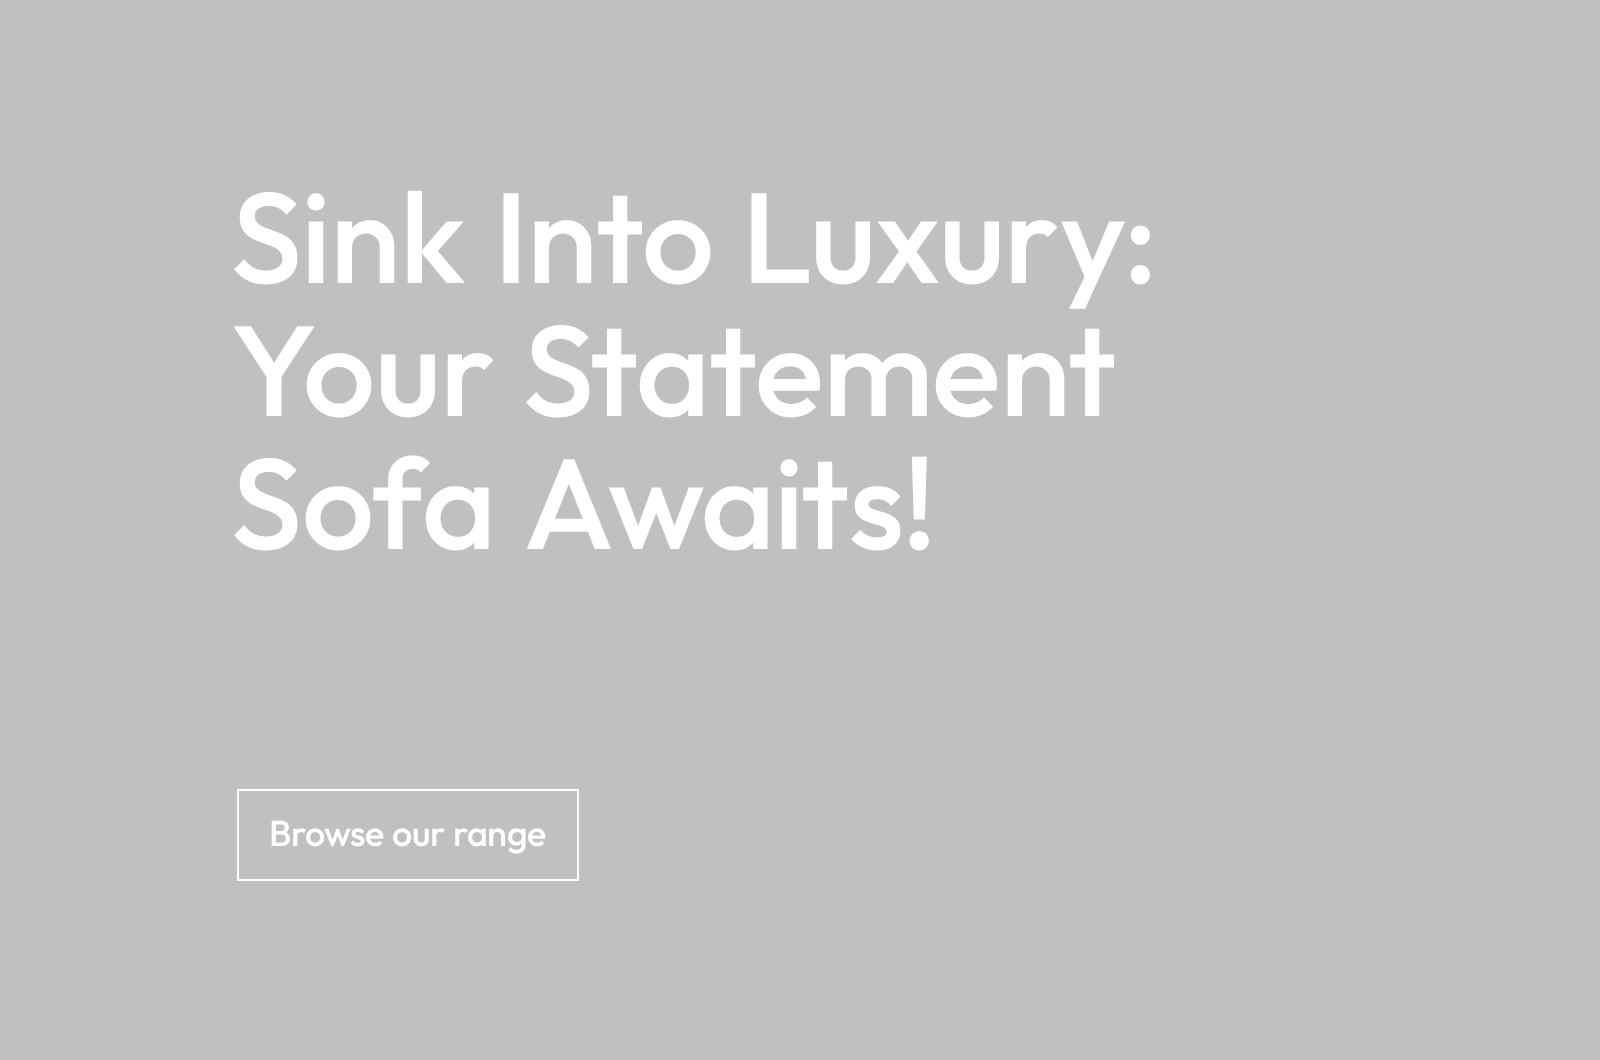 Sink Into Luxury: Your Statement Sofa Awaits!